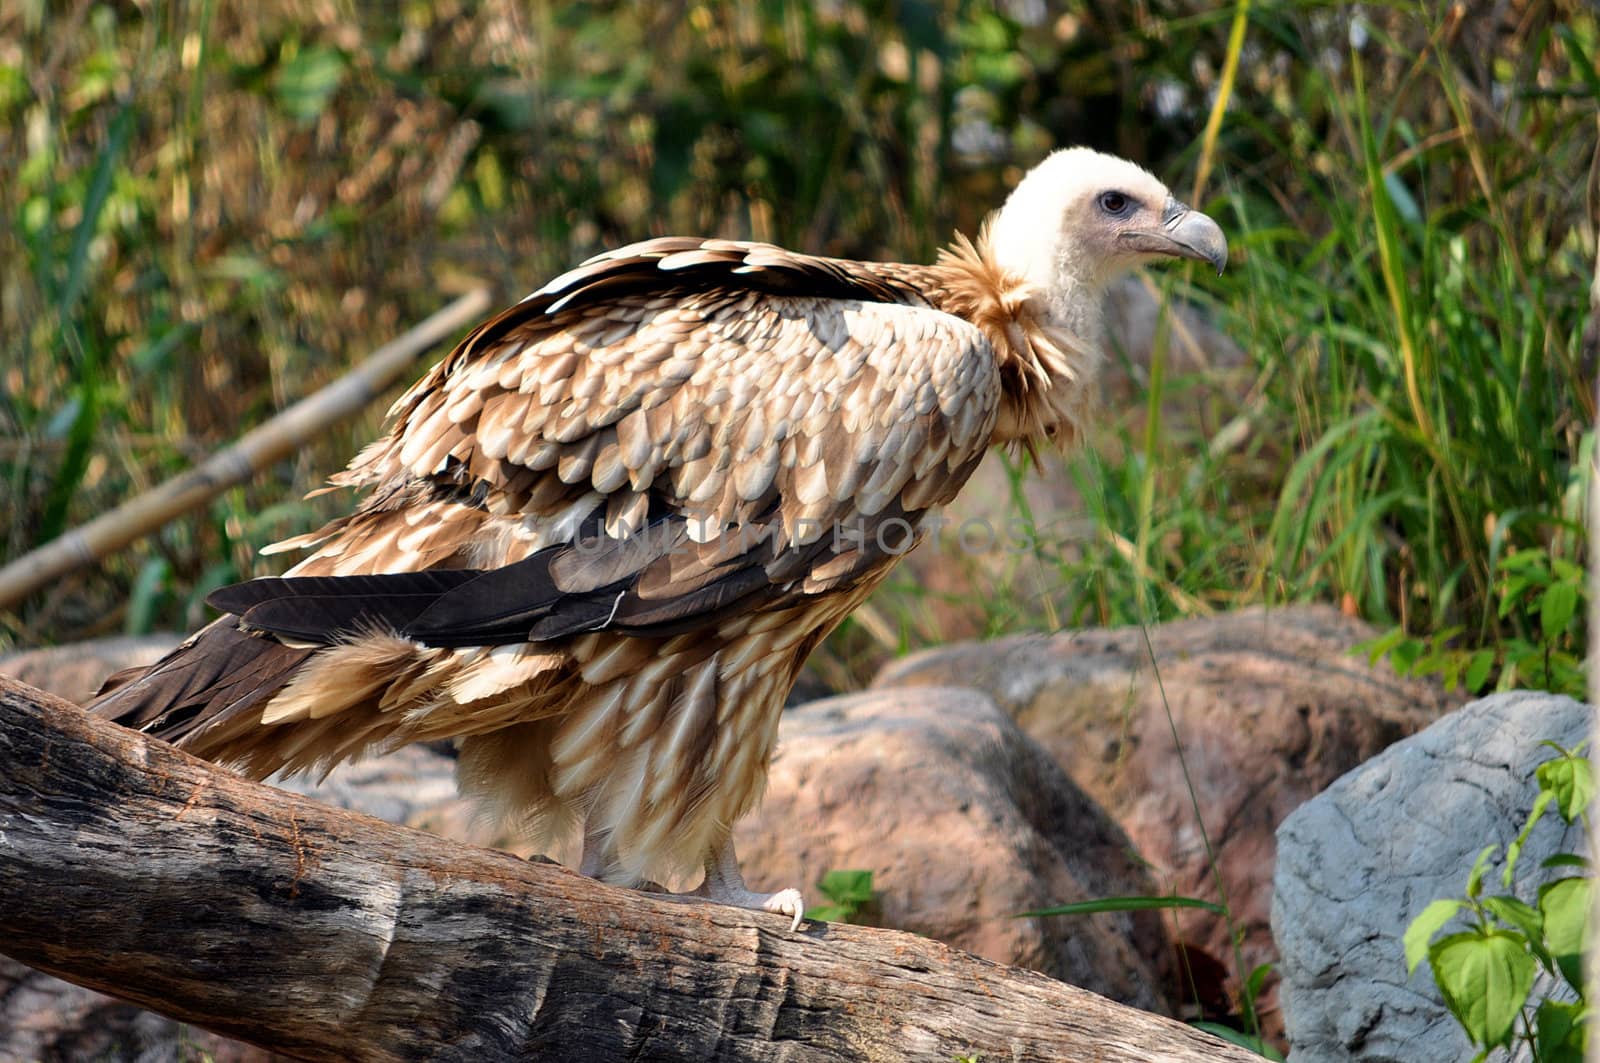 The Himalayan Griffon Vulture is even larger than the European Griffon Vulture. It has a white neck ruff and yellow bill. The whitish body and wing coverts contrast with the dark flight feathers.